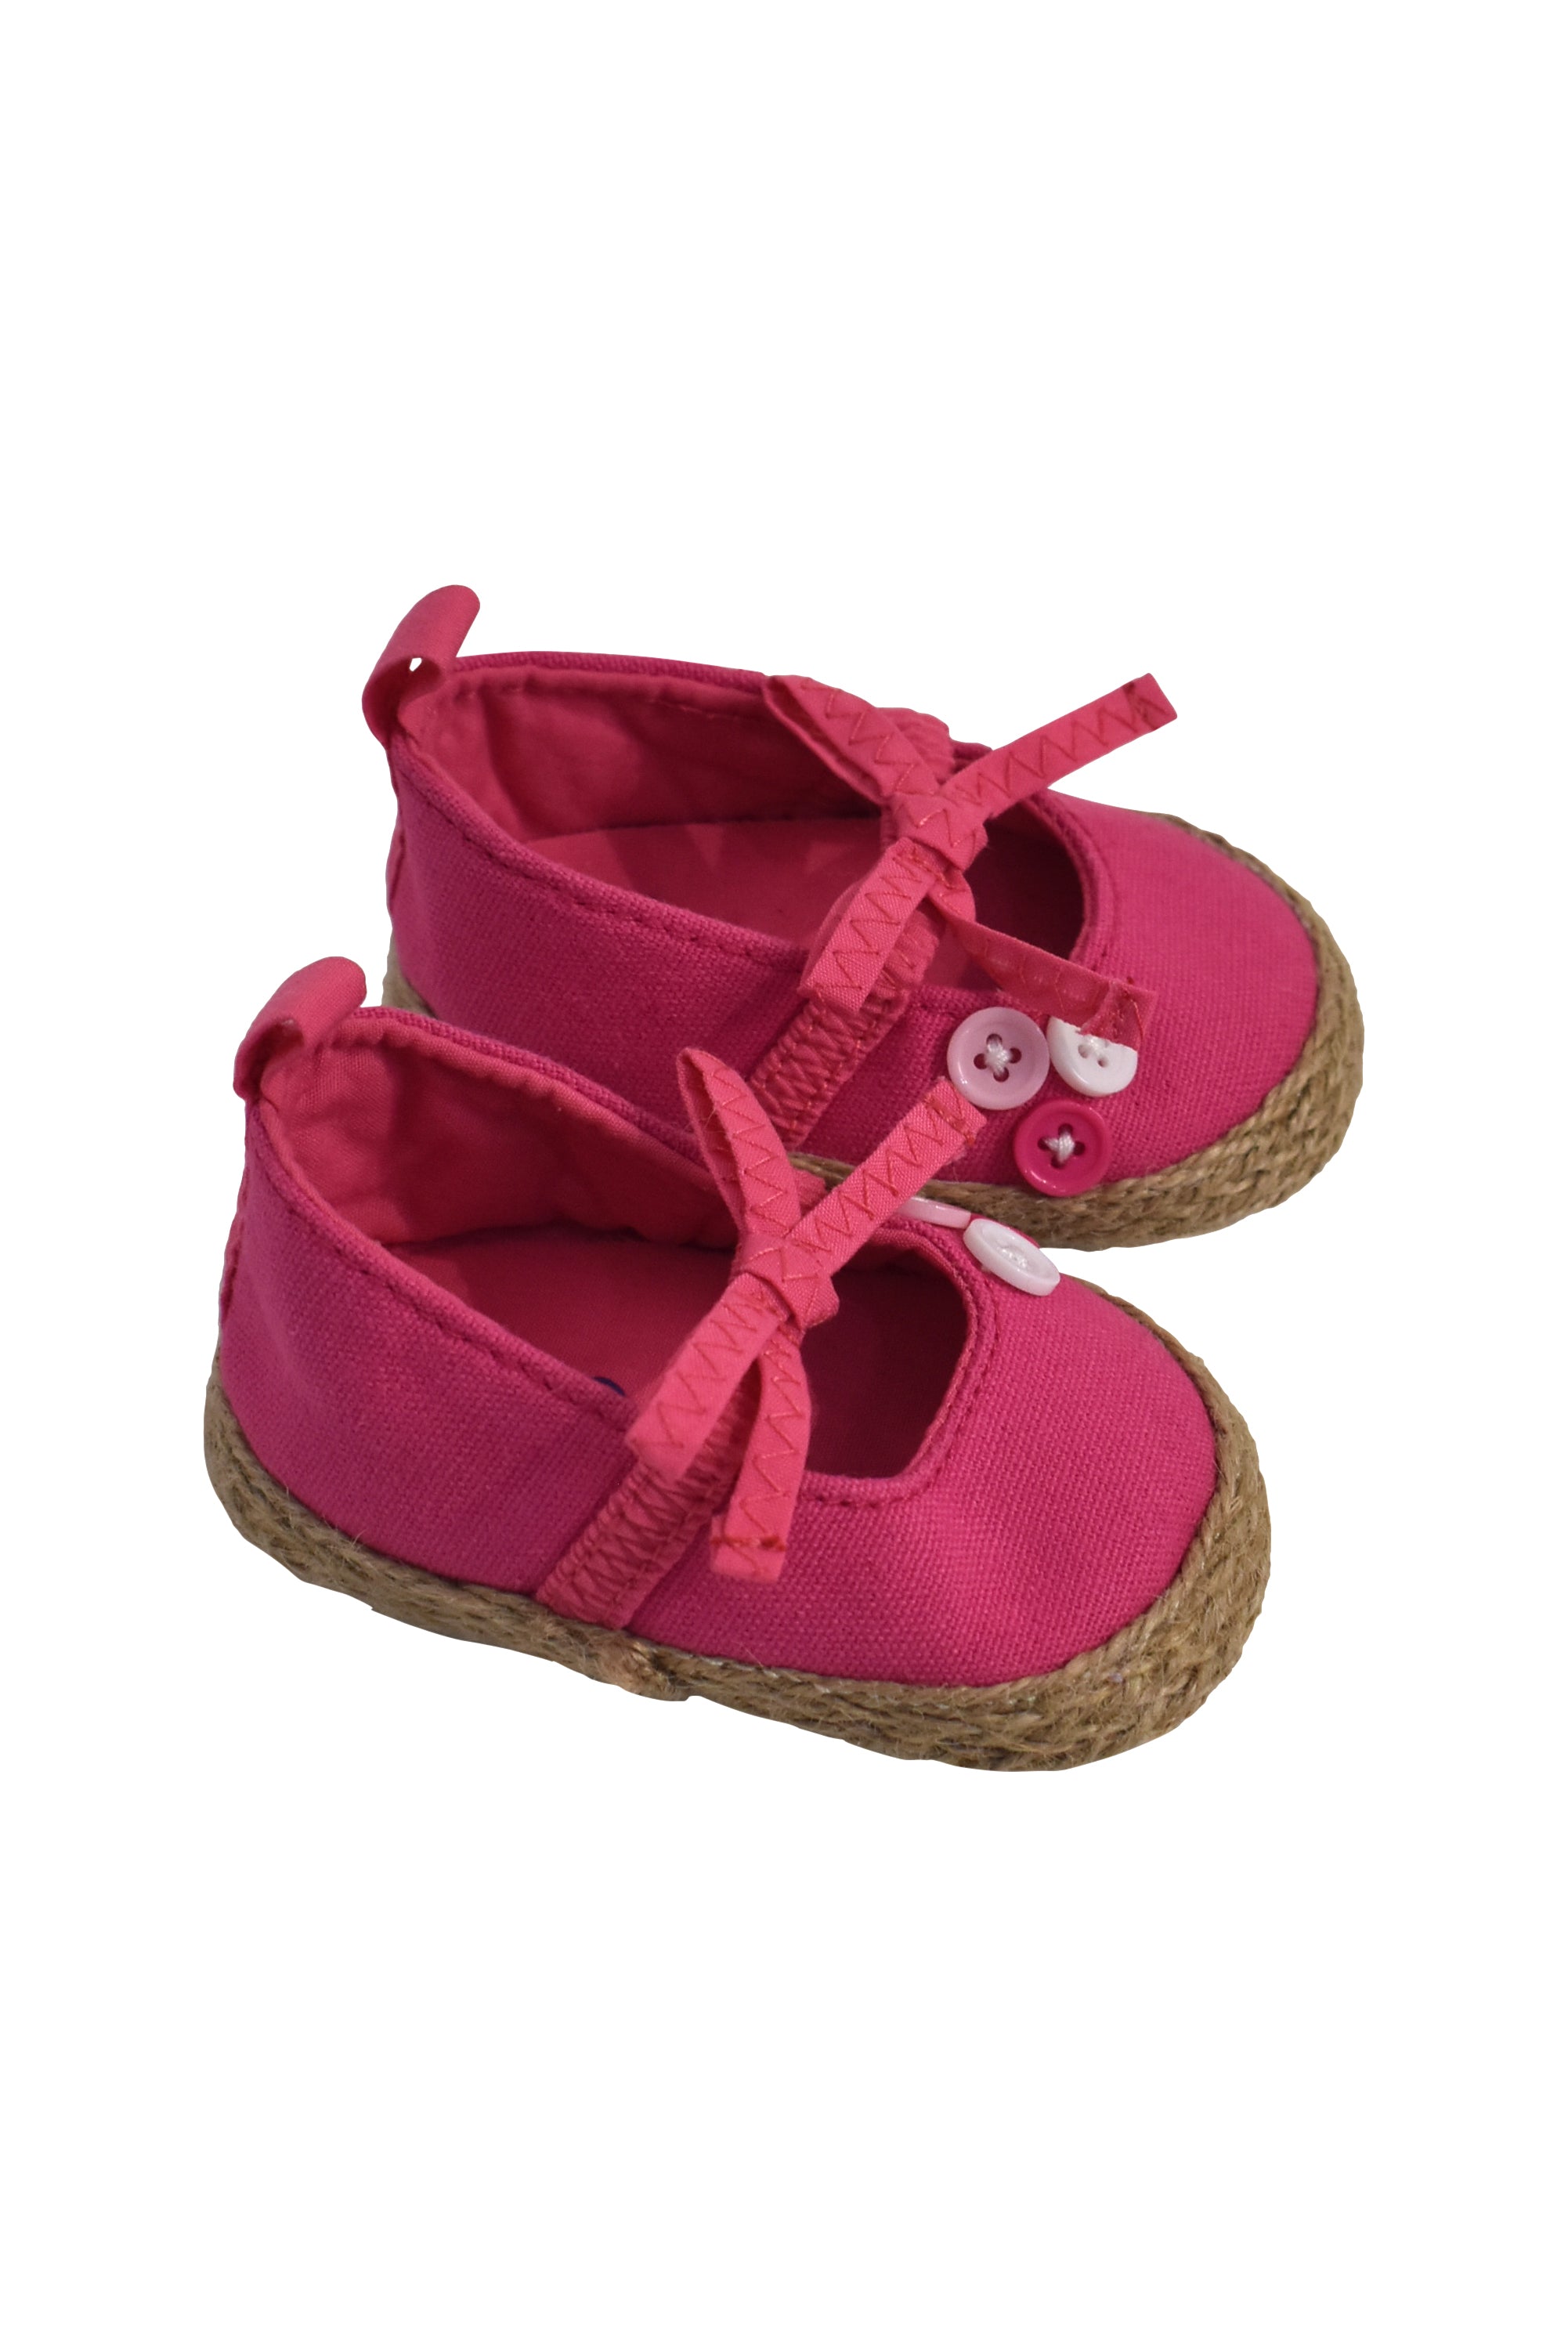 bebe baby shoes